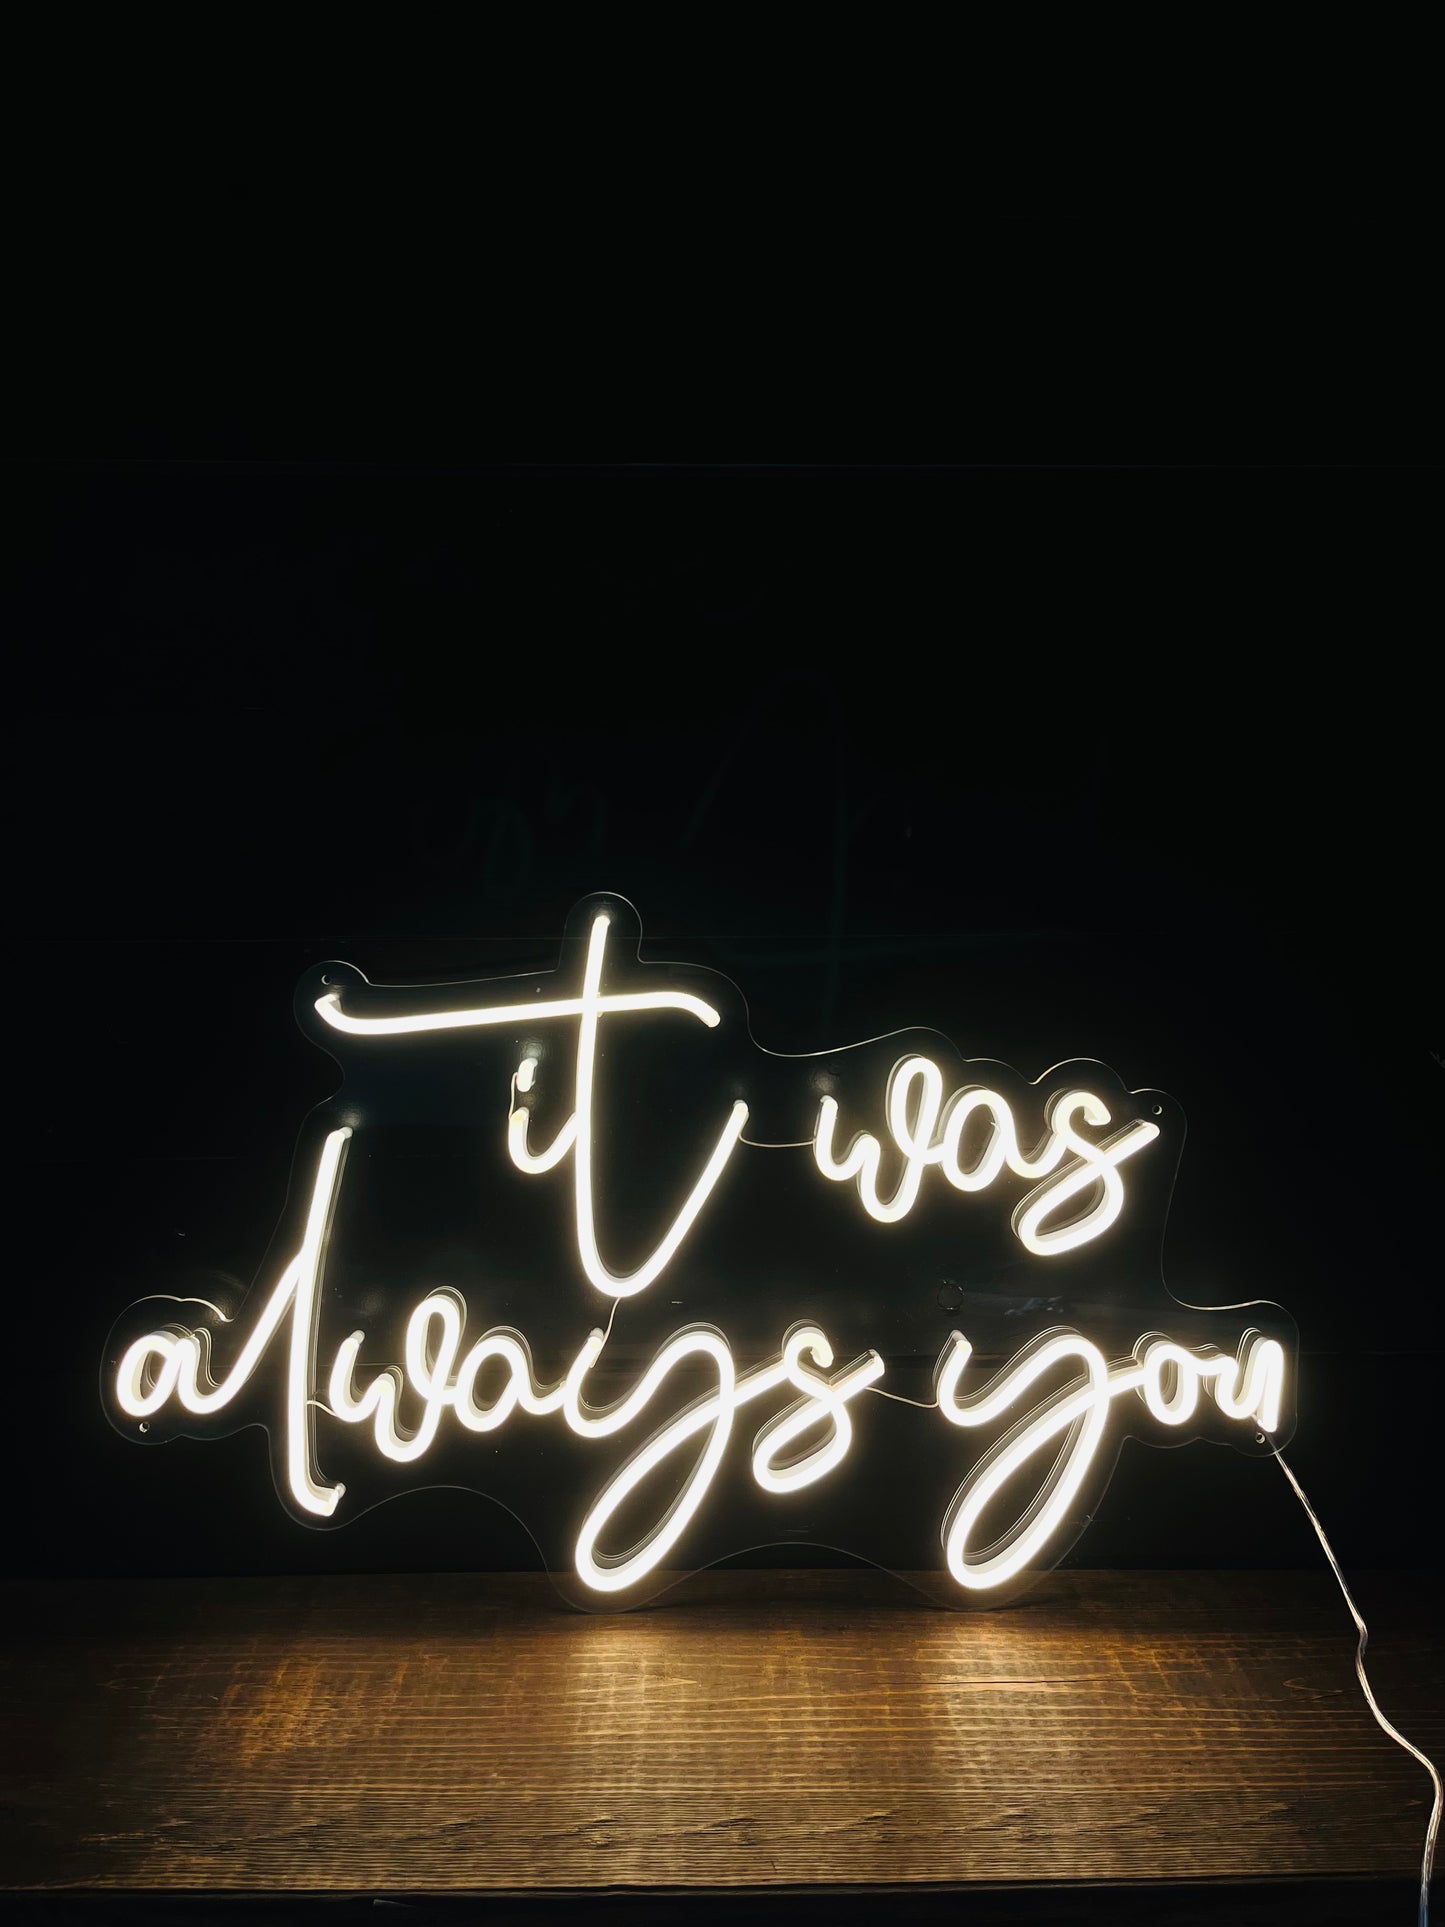 It was always you Neon Sign